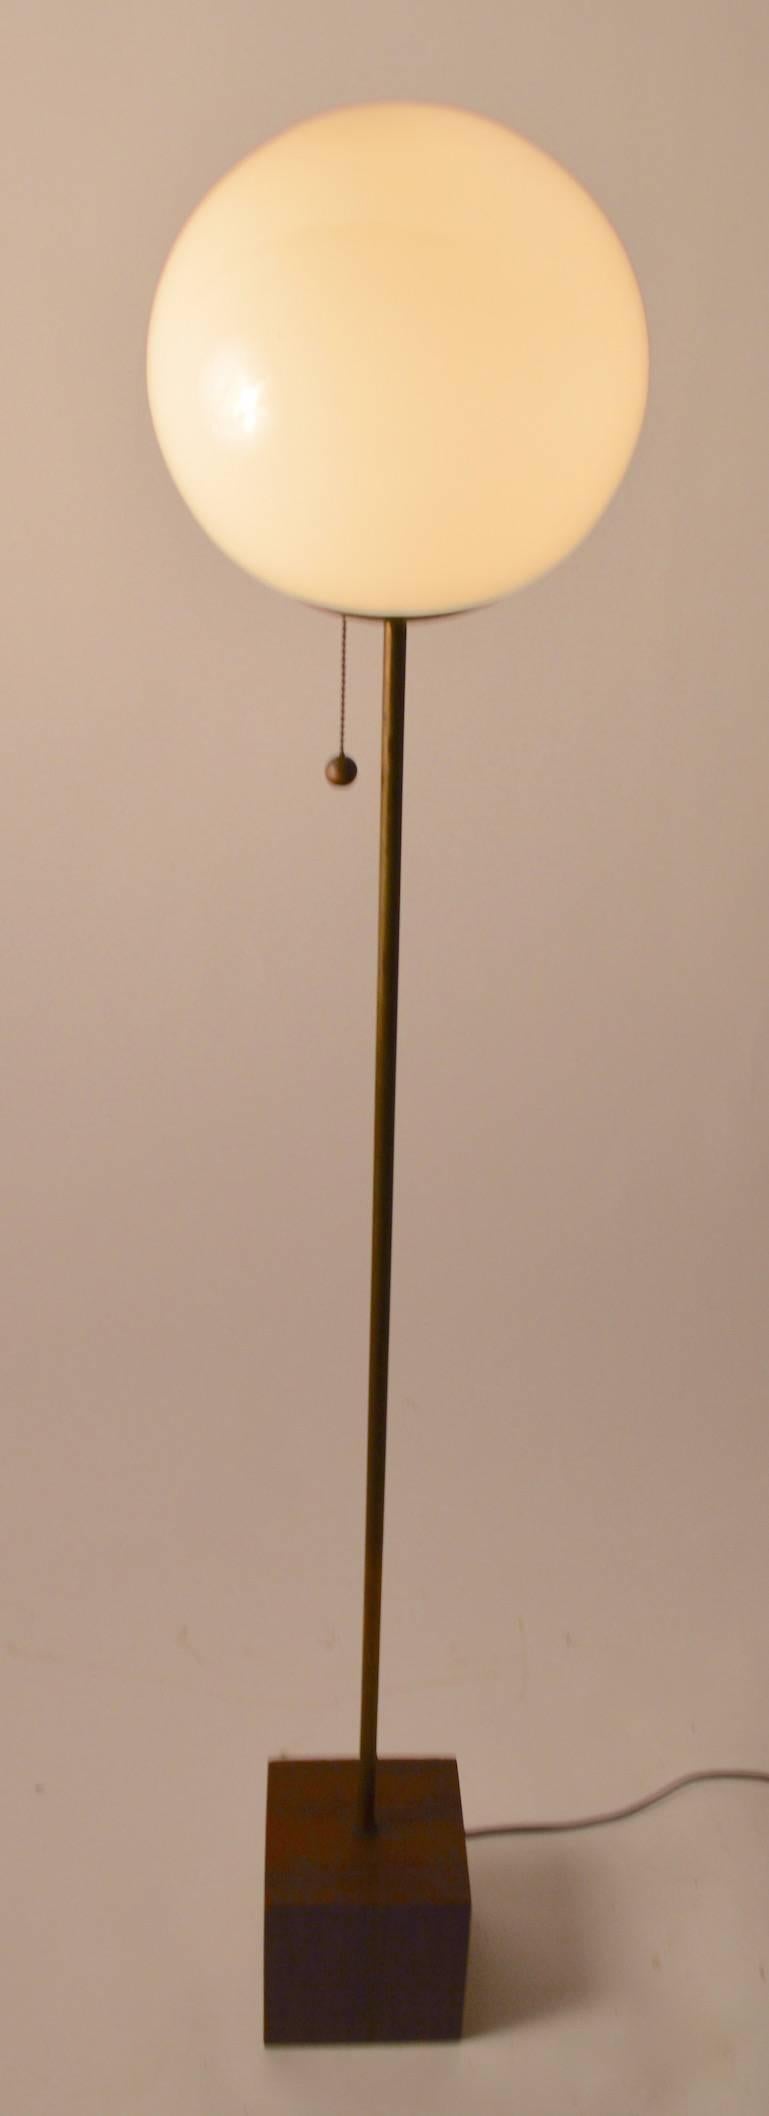 American Glass Ball Top Floor Lamp Attributed to Laurel Lamp Co.